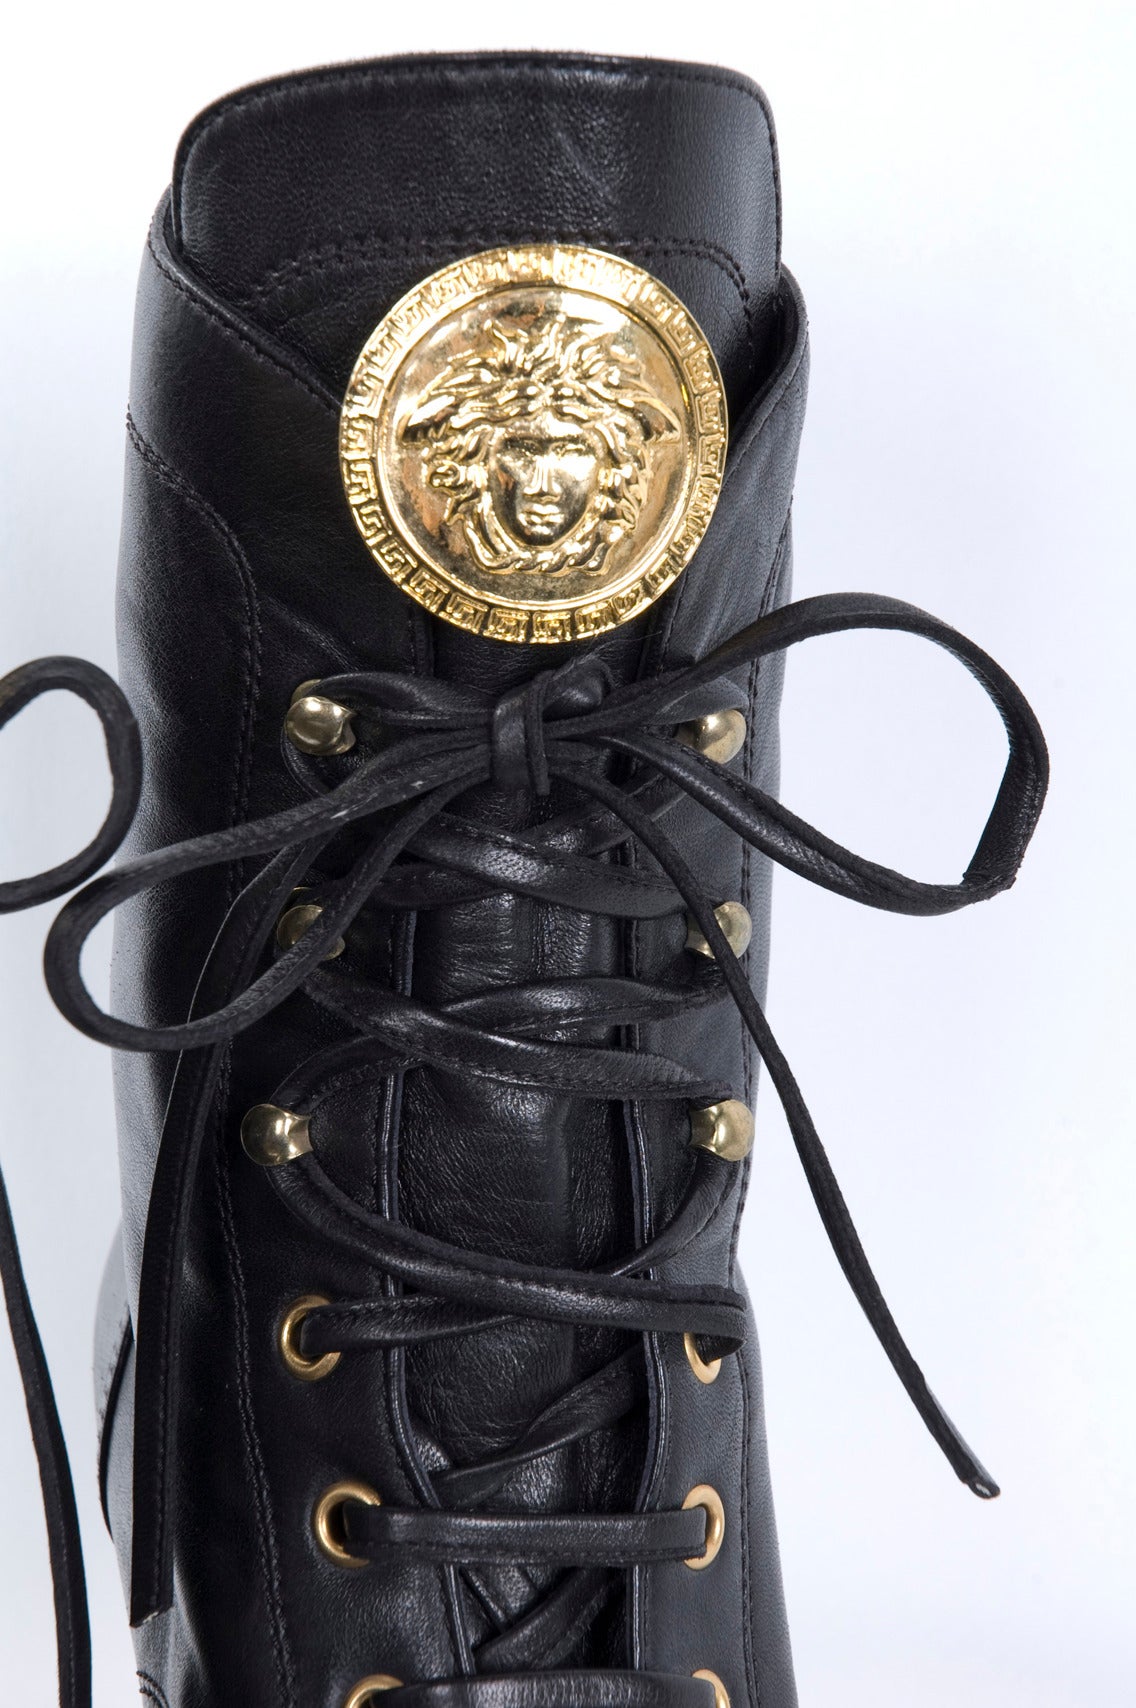 Vintage Gianni Versace black lace-up leather boots with large gilded Medusa.
From ca. 1980 
Worn once for a few hours - Excellent Condition.
Size 39.5 EU - 9.5 US